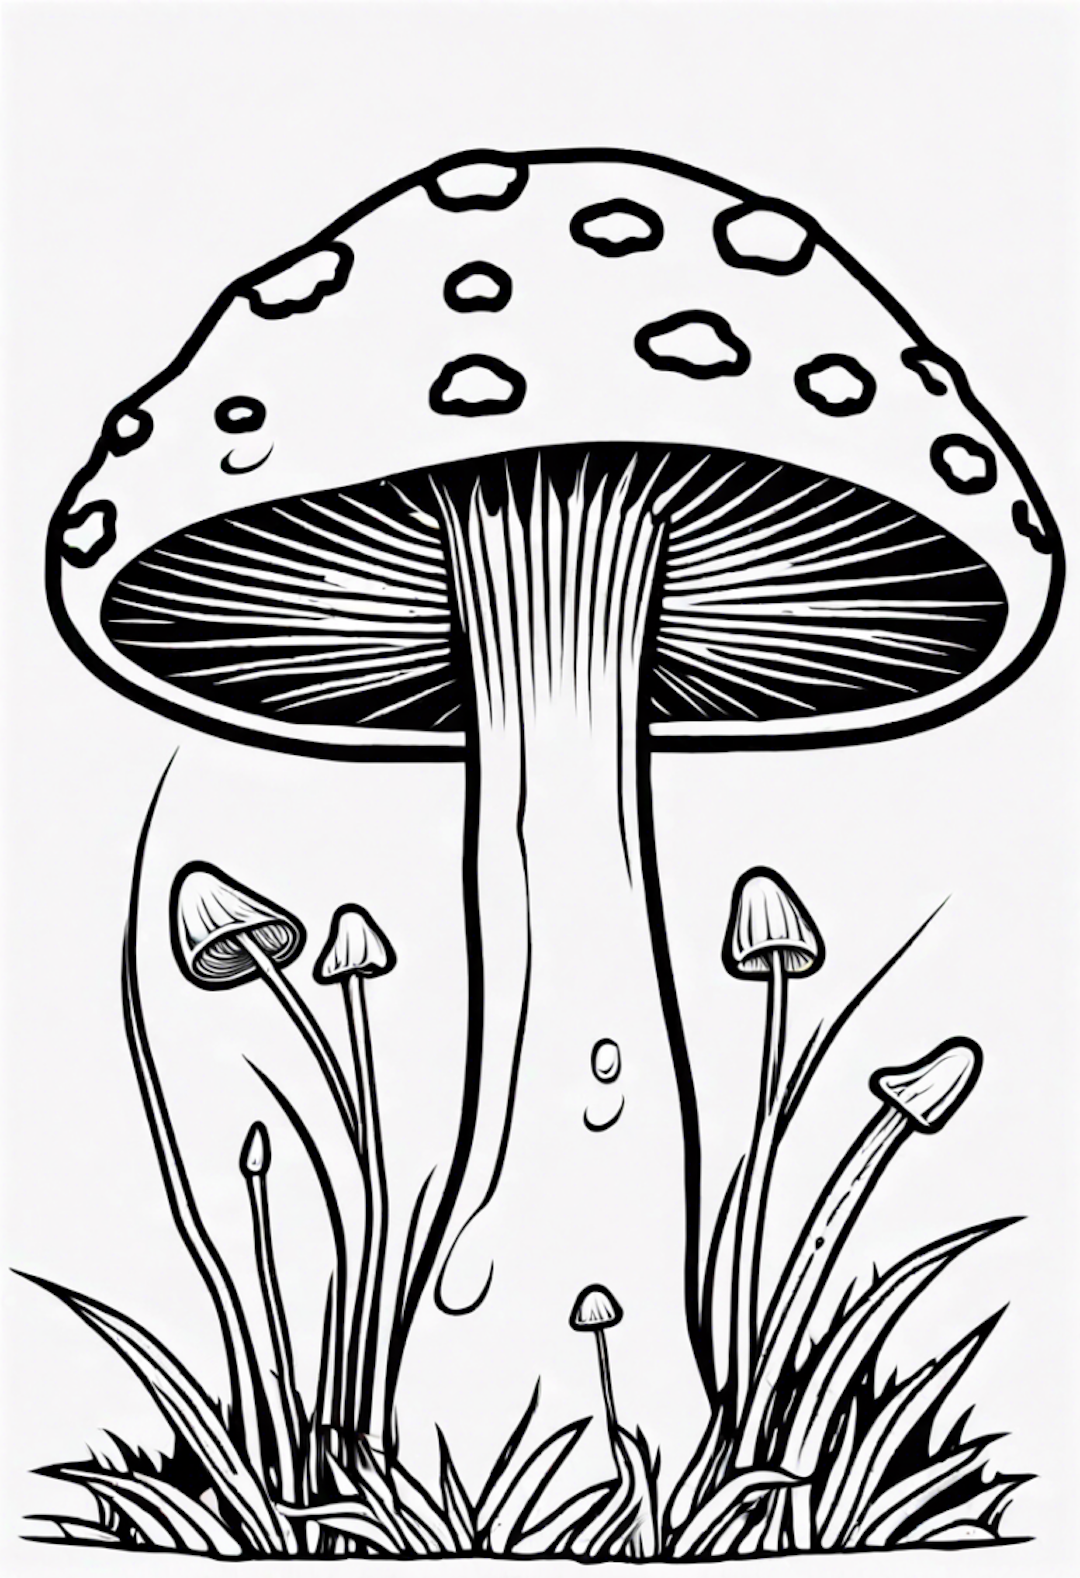 Mushroom With Arms coloring pages